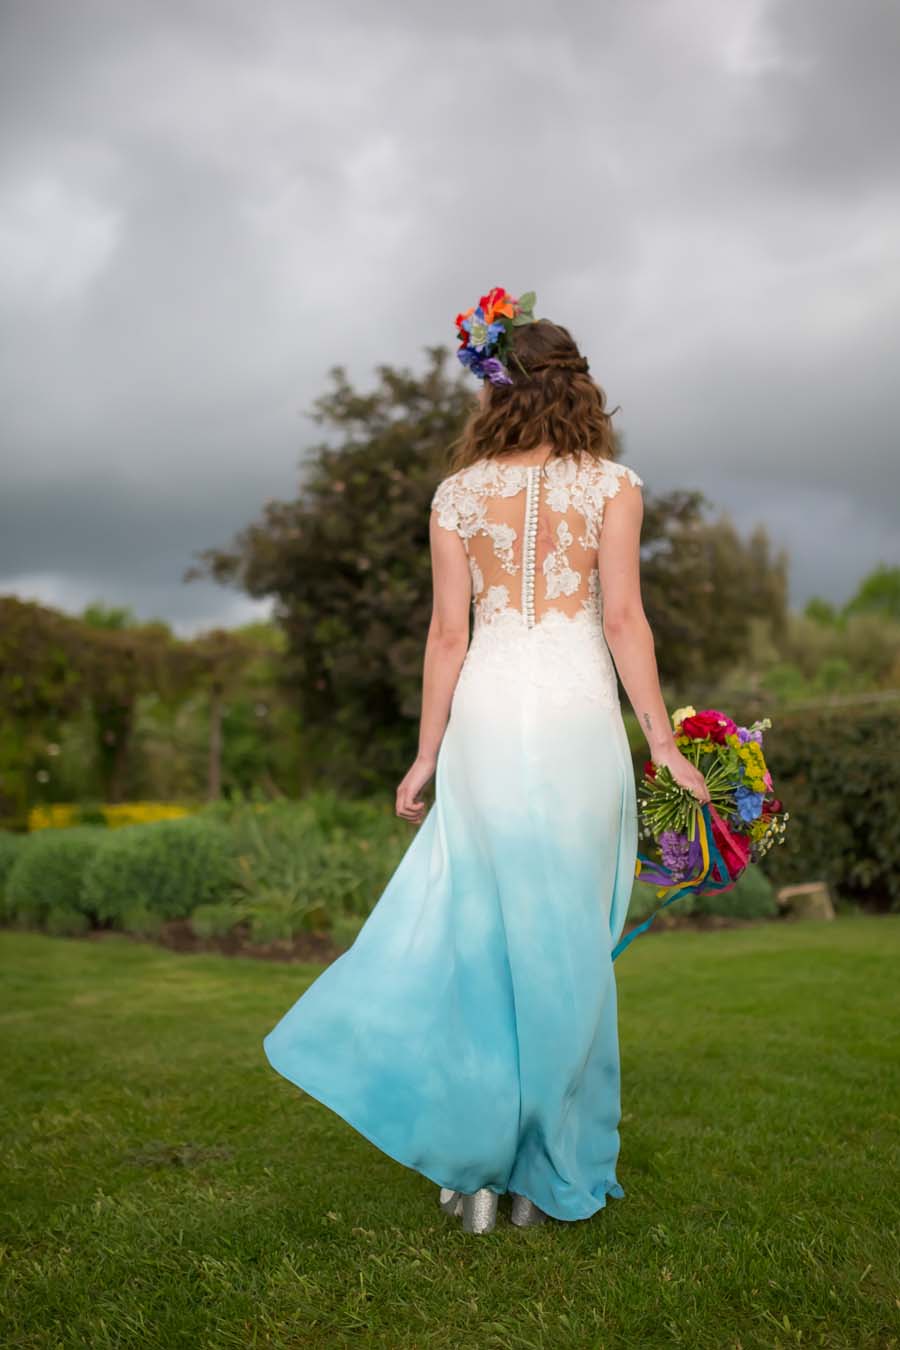 Curious & Colourful! A 'Through the Looking Glass' Bridal Shoot